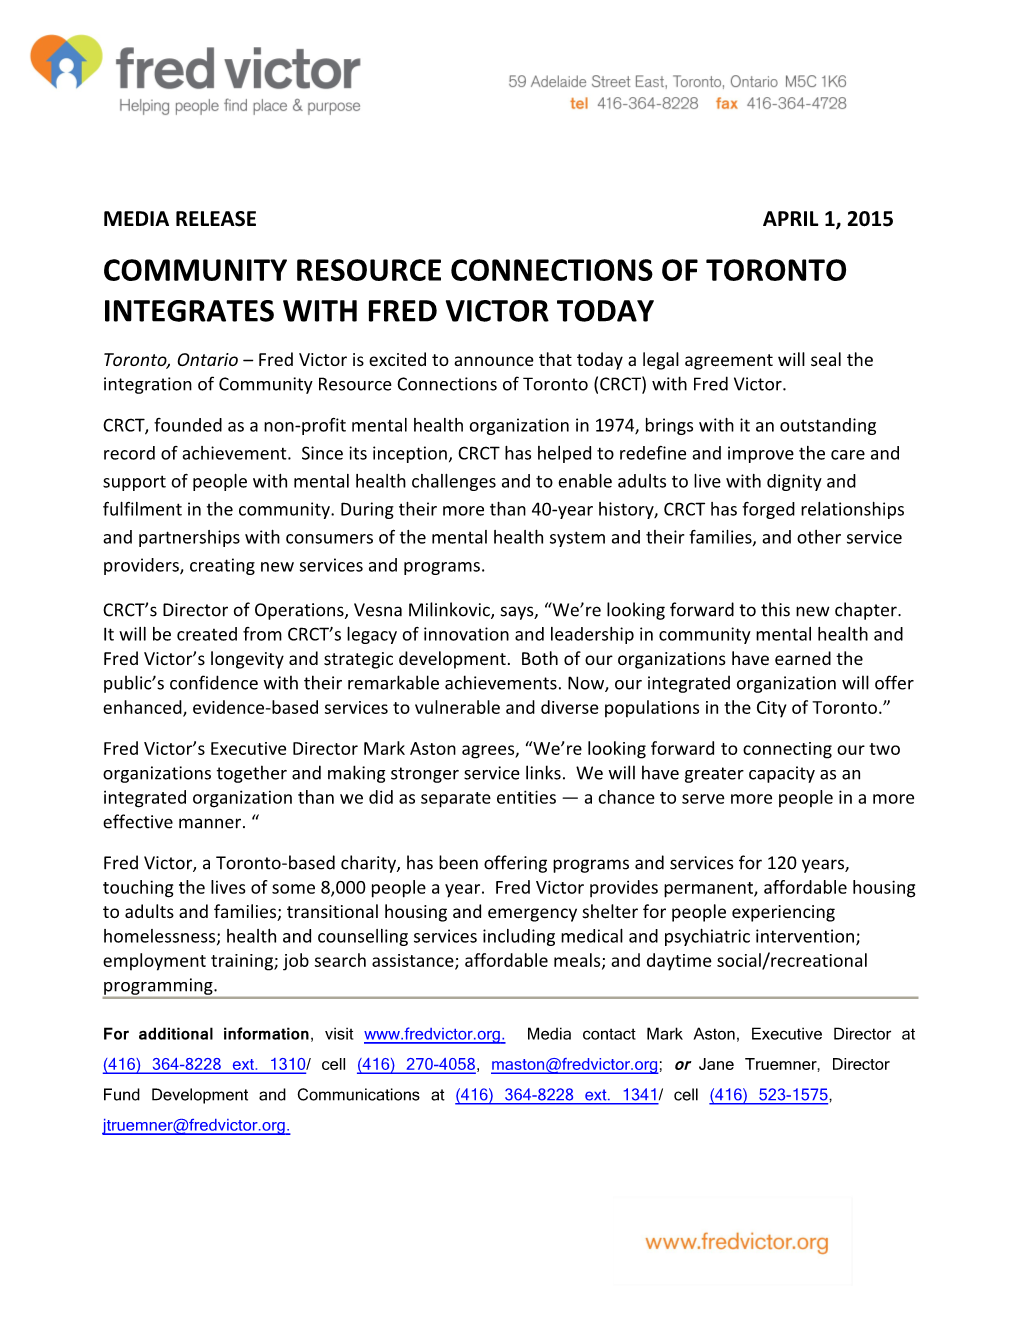 Community Resource Connections of Toronto Integrates with Fred Victor Today